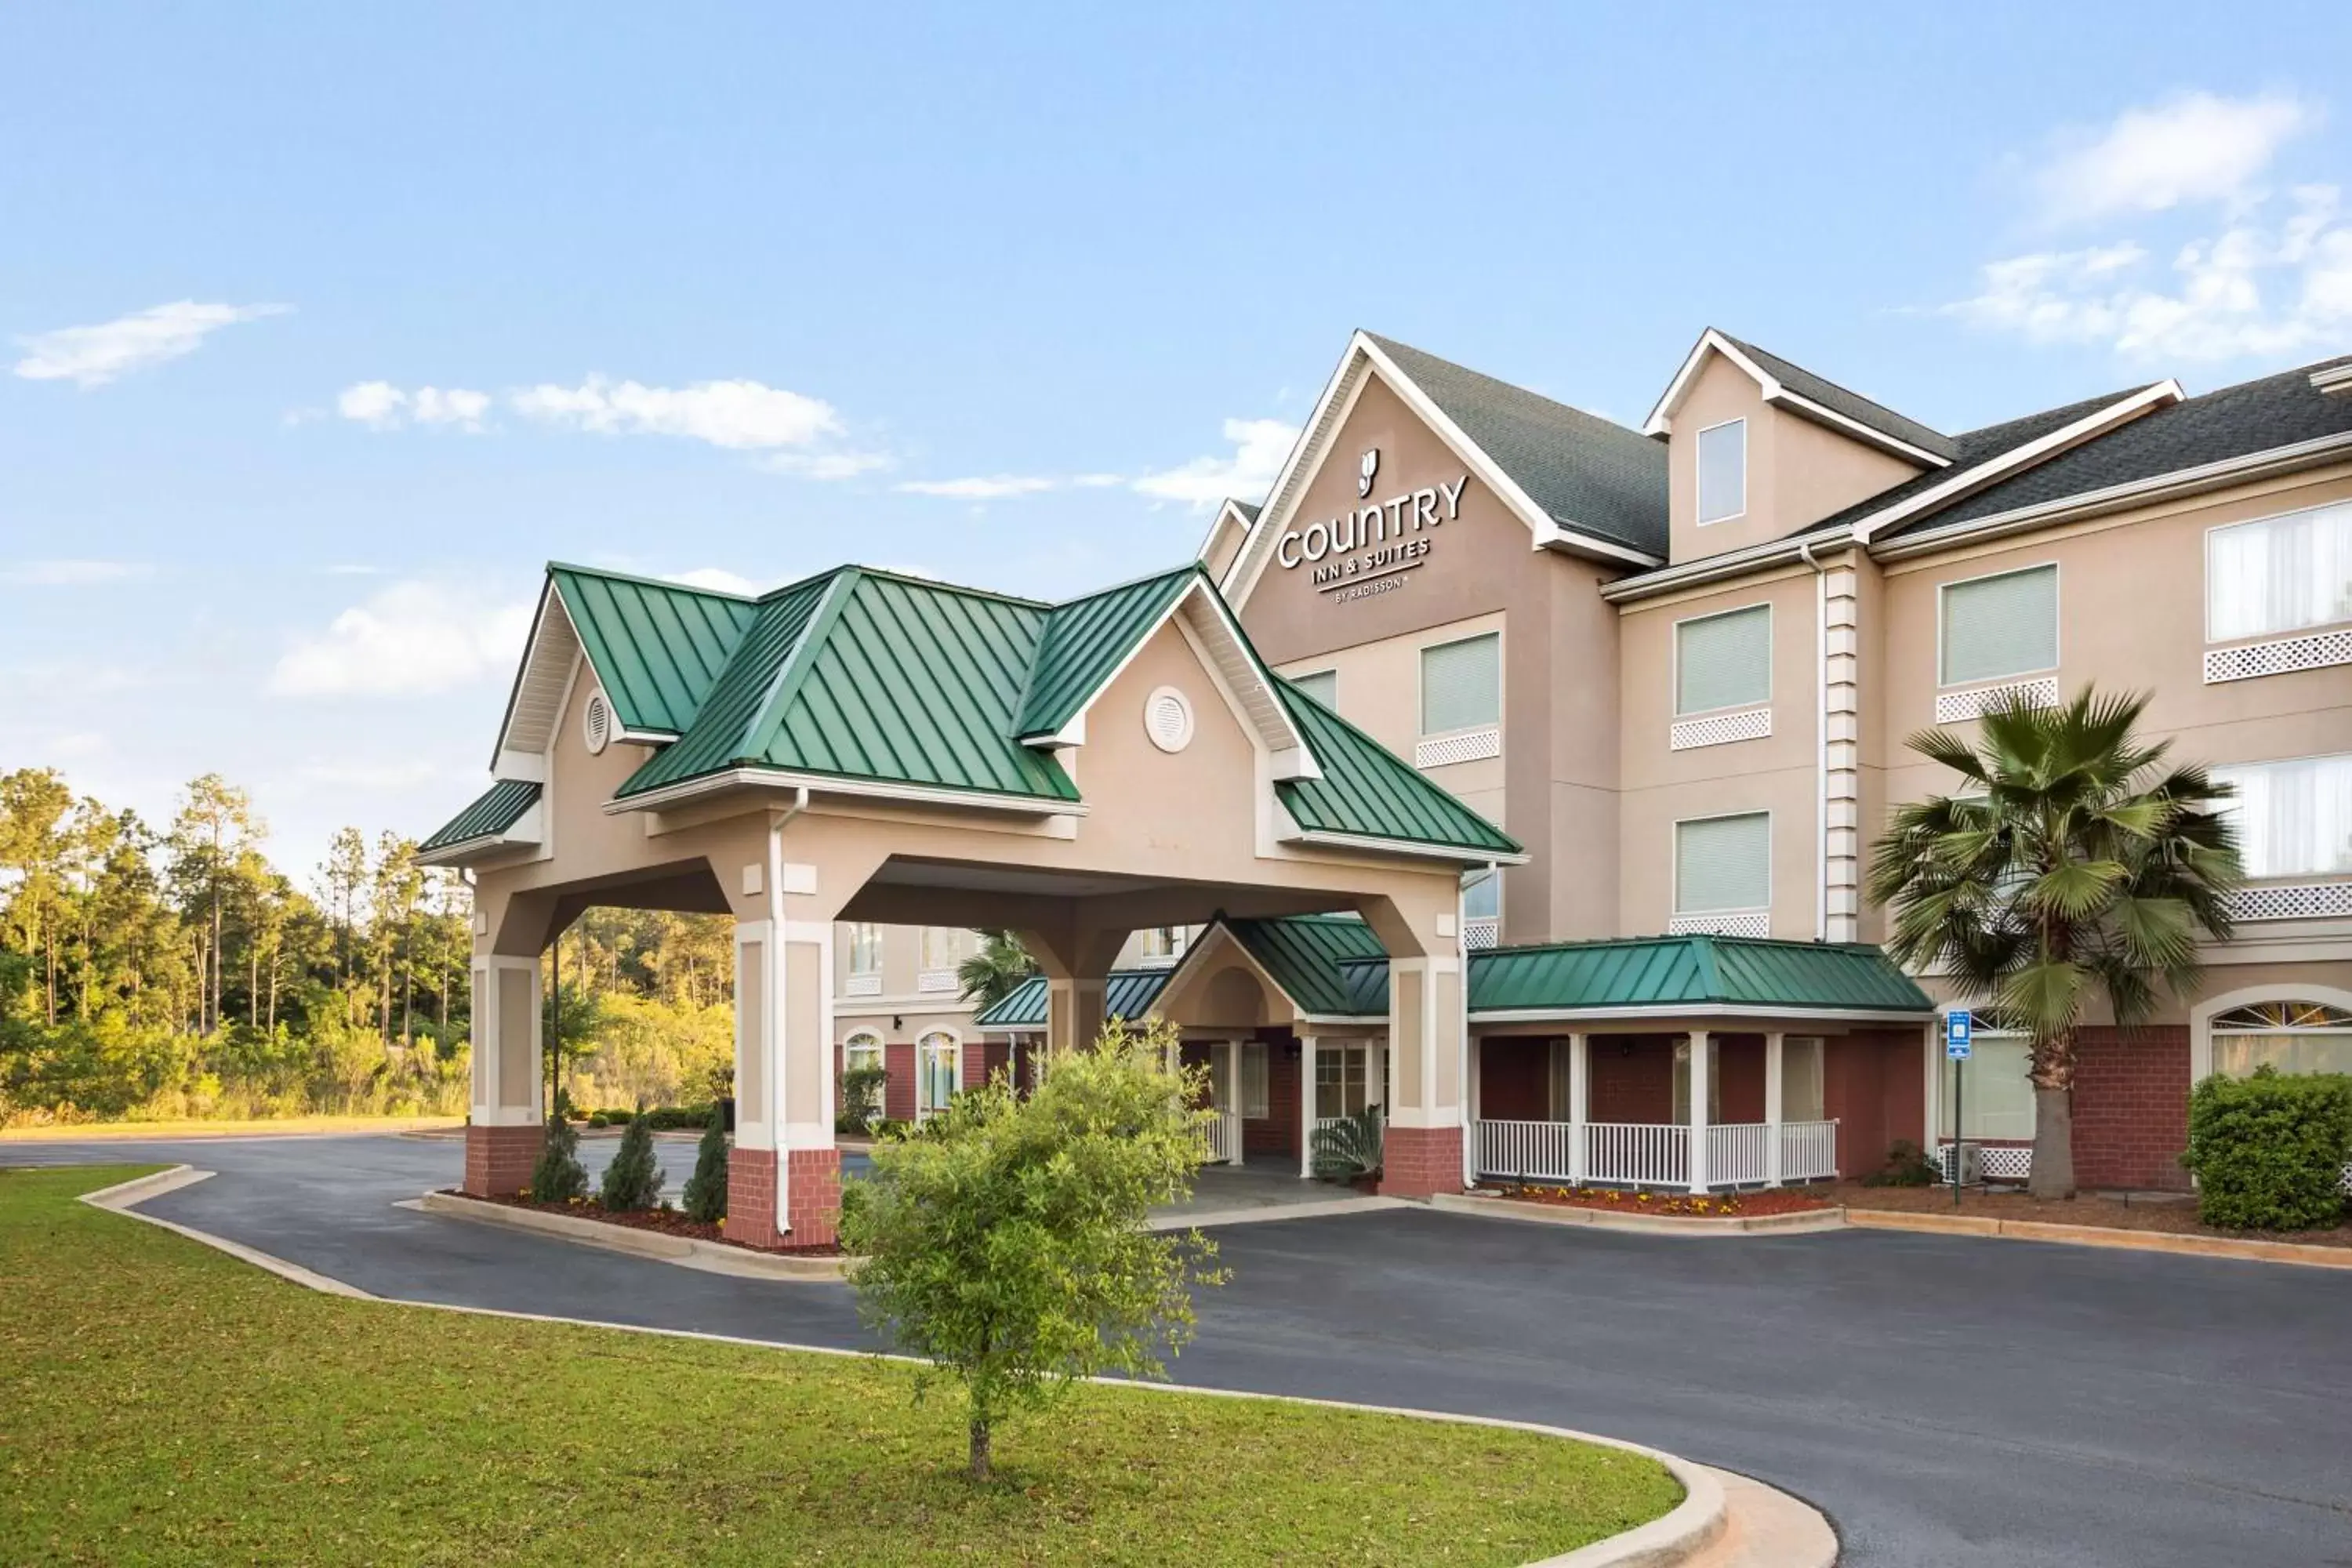 Property building in Country Inn & Suites by Radisson, Albany, GA